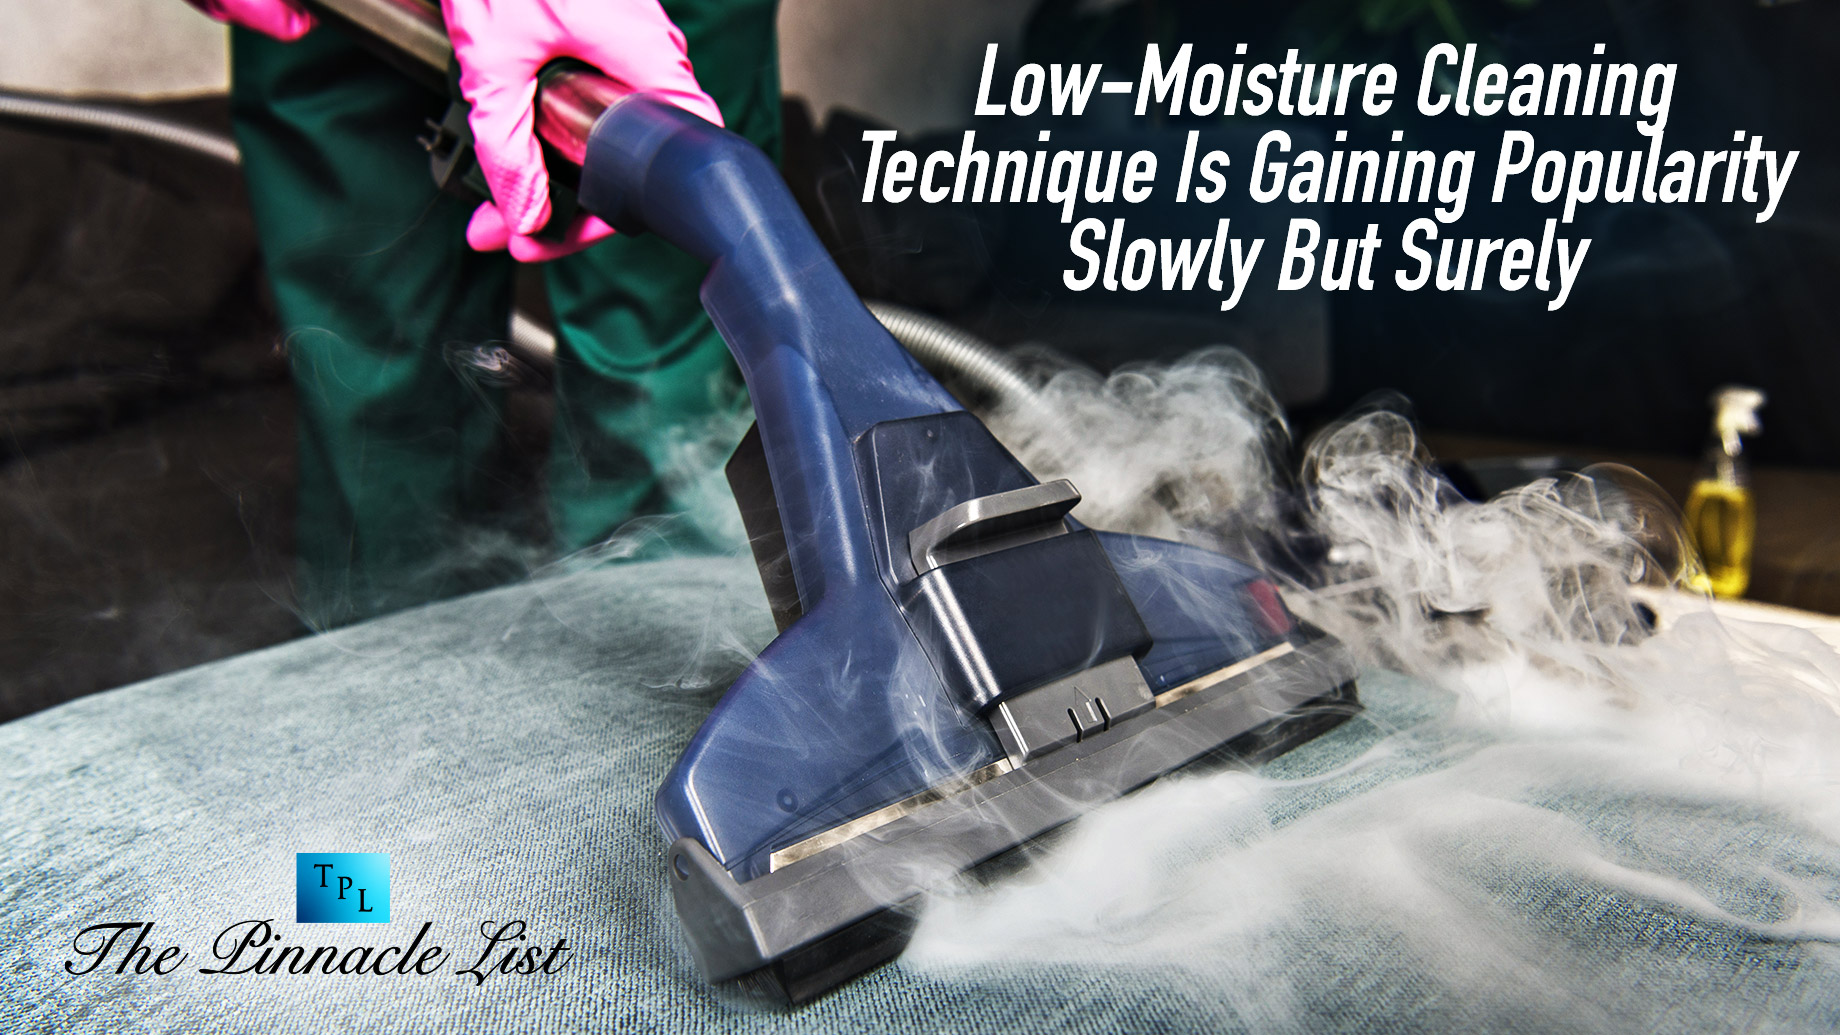 Low-Moisture Cleaning Technique Is Gaining Popularity Slowly But Surely